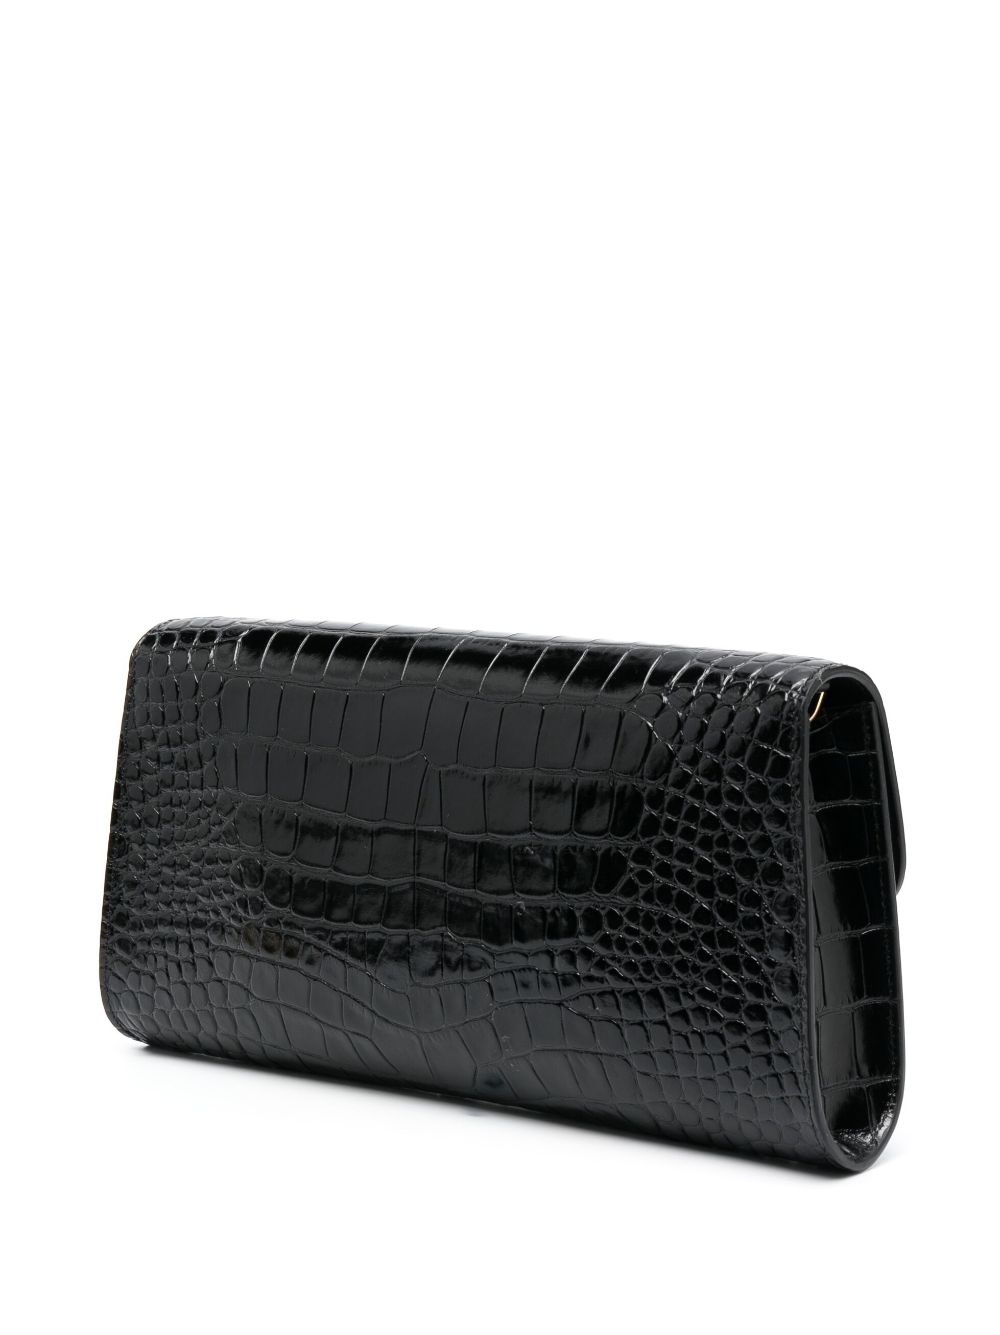 embossed-crocodile effect leather clutch - 3